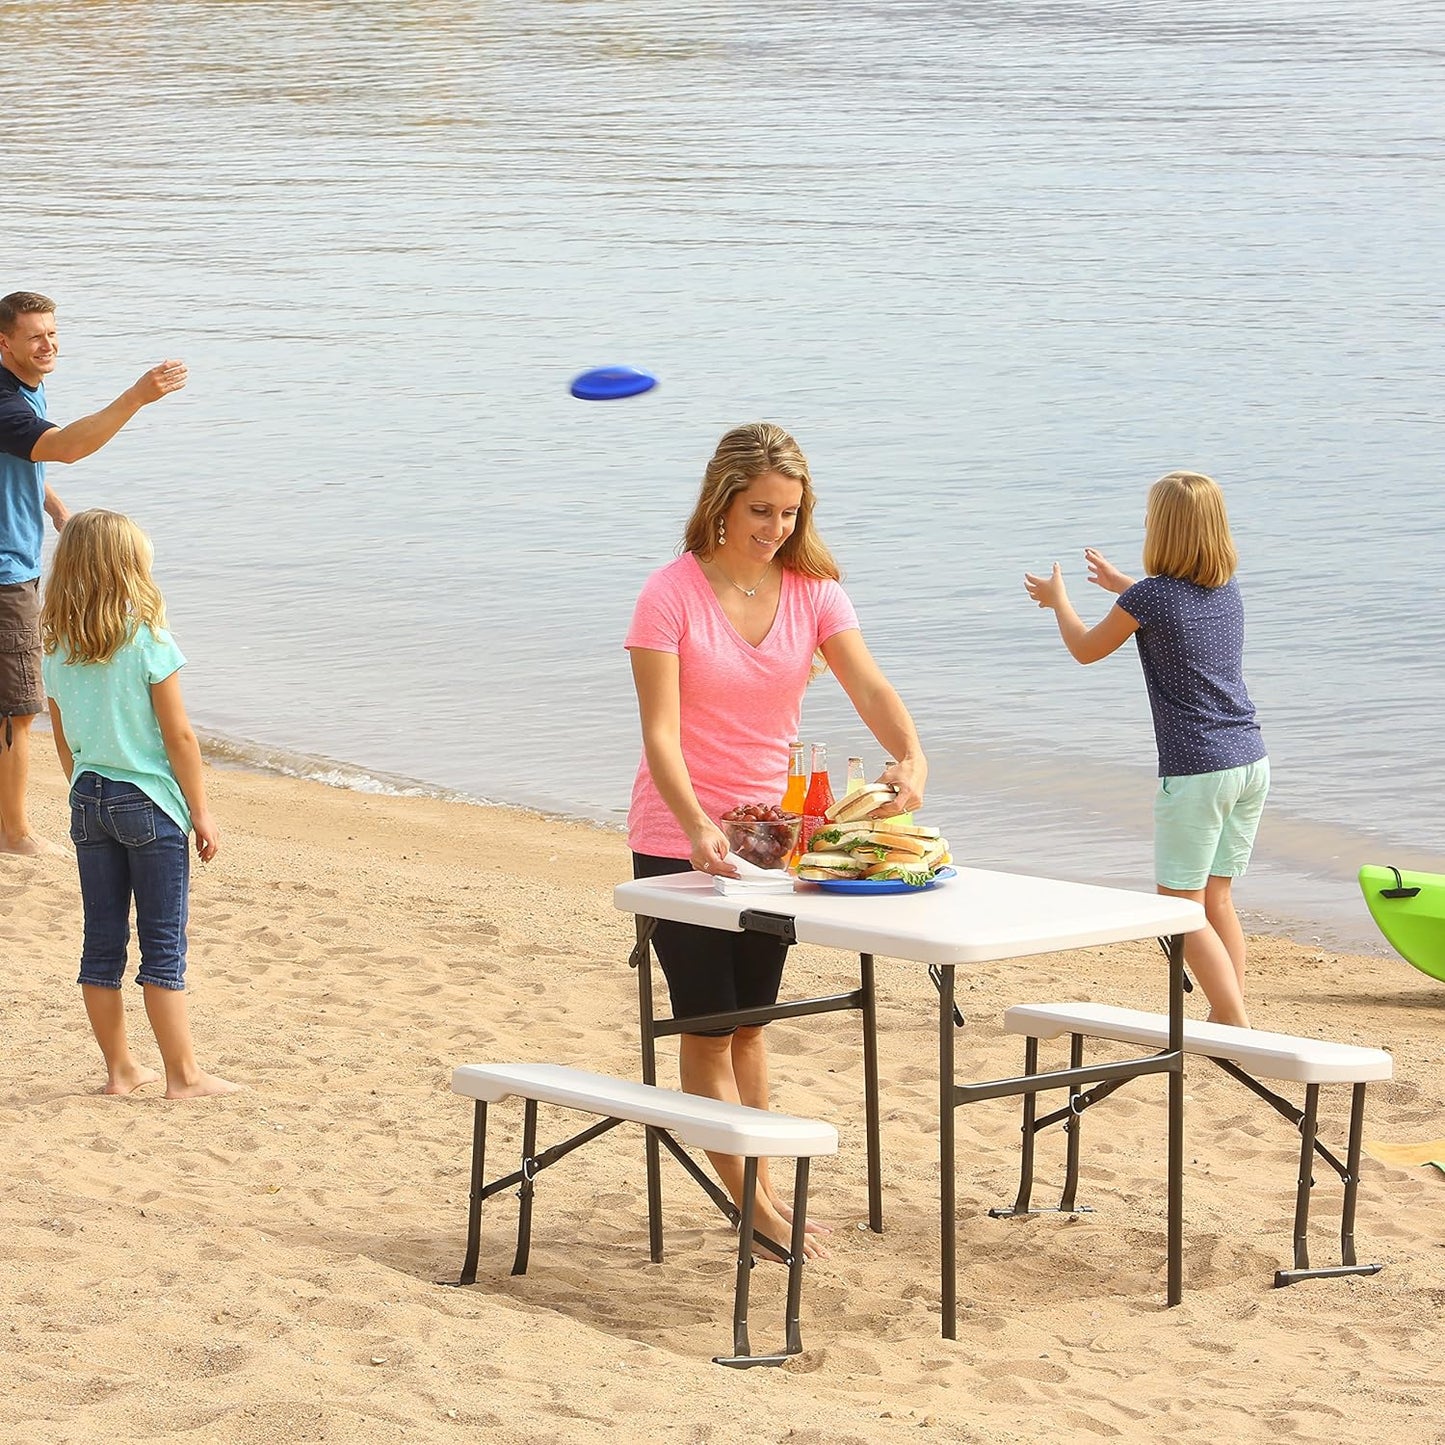 LIFETIME 80373 Portable Folding Camping RV Picnic Table and Bench Set, Almond